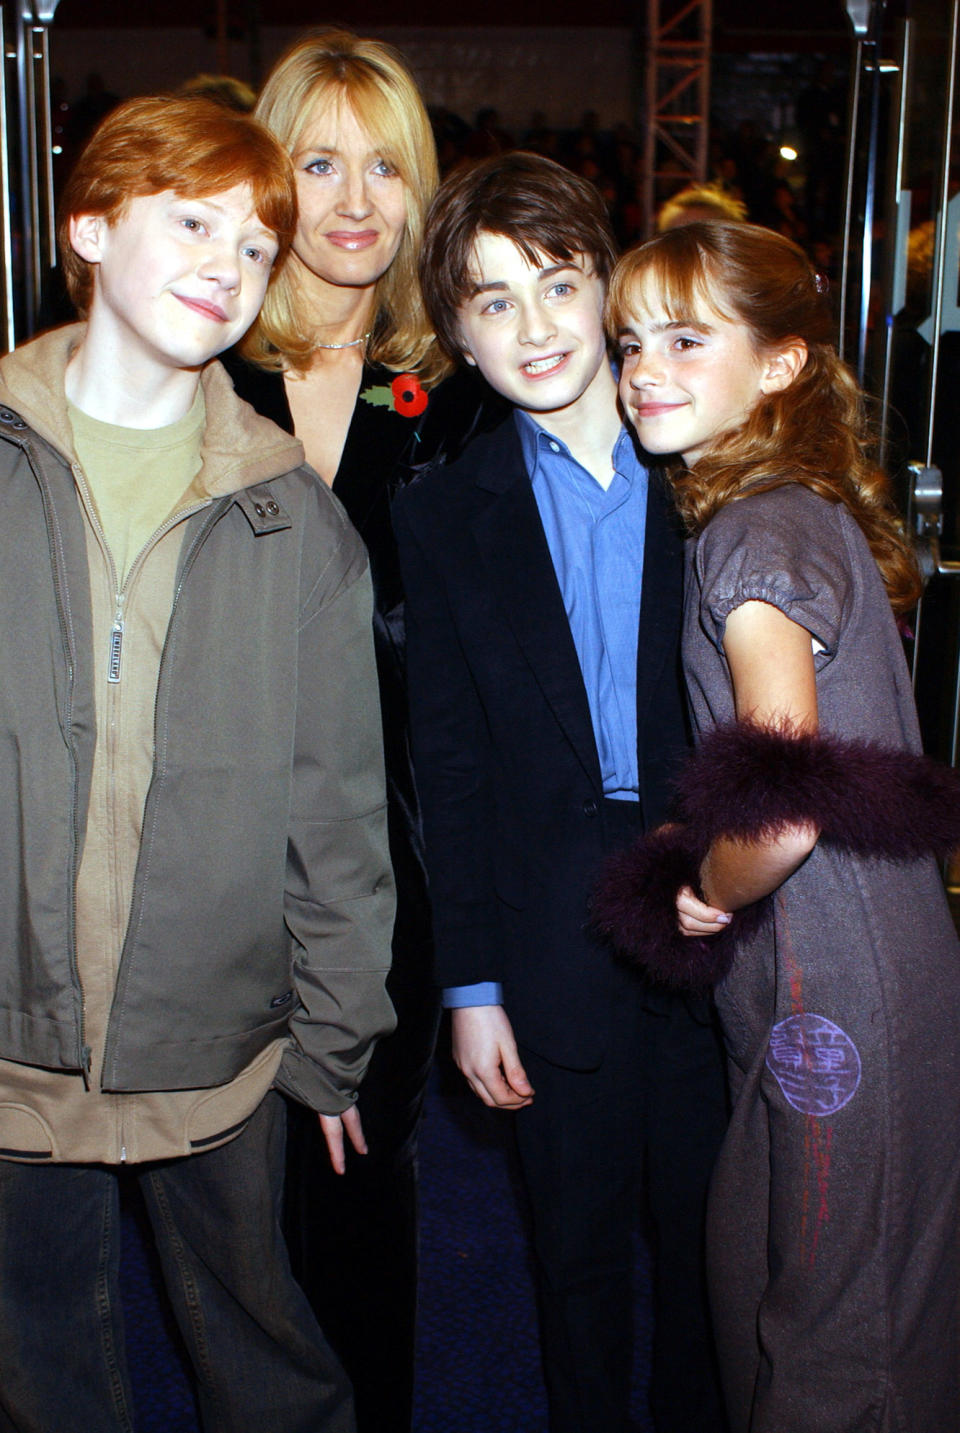 (L-R) Rupert Grint, J K Rowling, Daniel Radcliffe and Emma Watson arrive for world premiere of 'Harry Potter and the Philosopher's Stone at the Odeon Leicester Square in London.